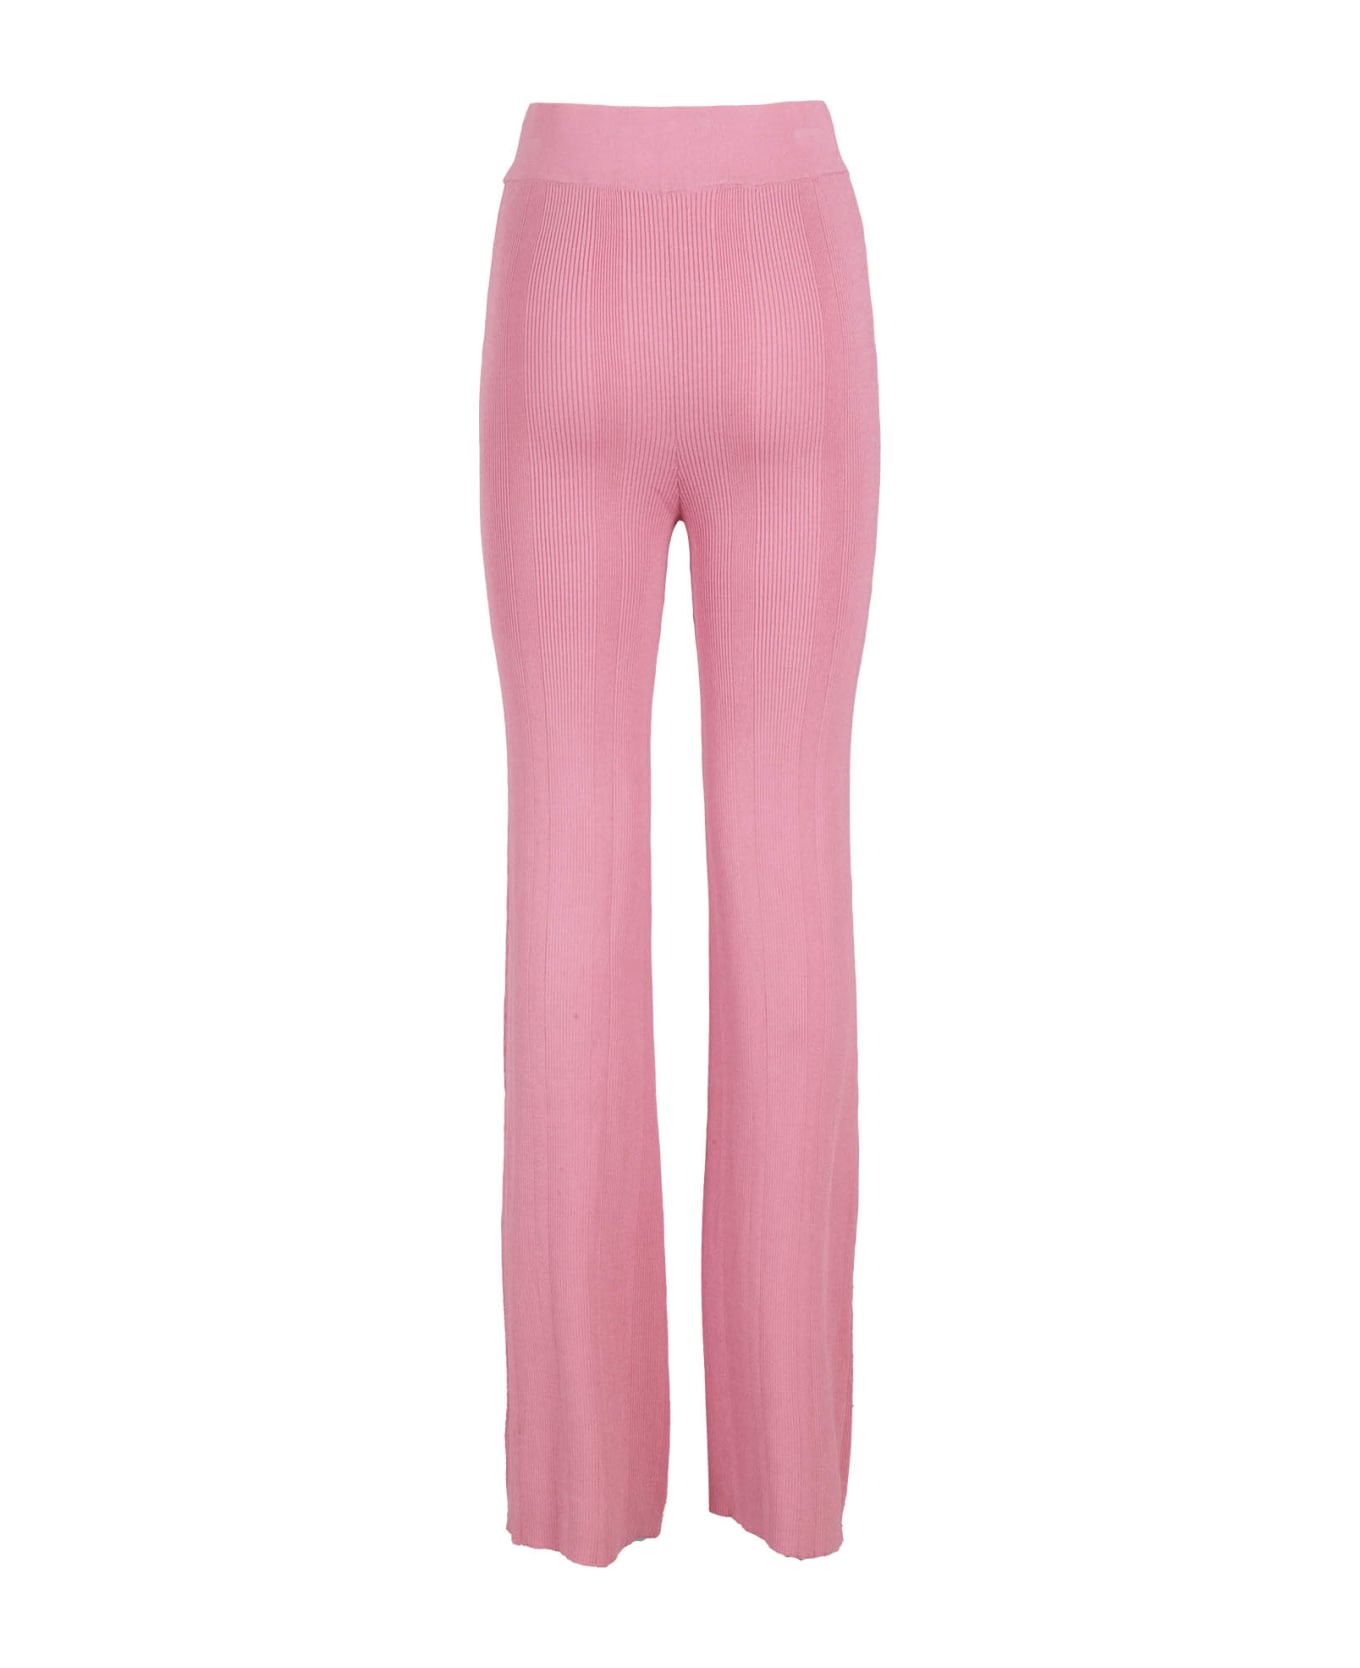 REMAIN Birger Christensen Ribbed Knit Straight Pant - Cashmere Rose